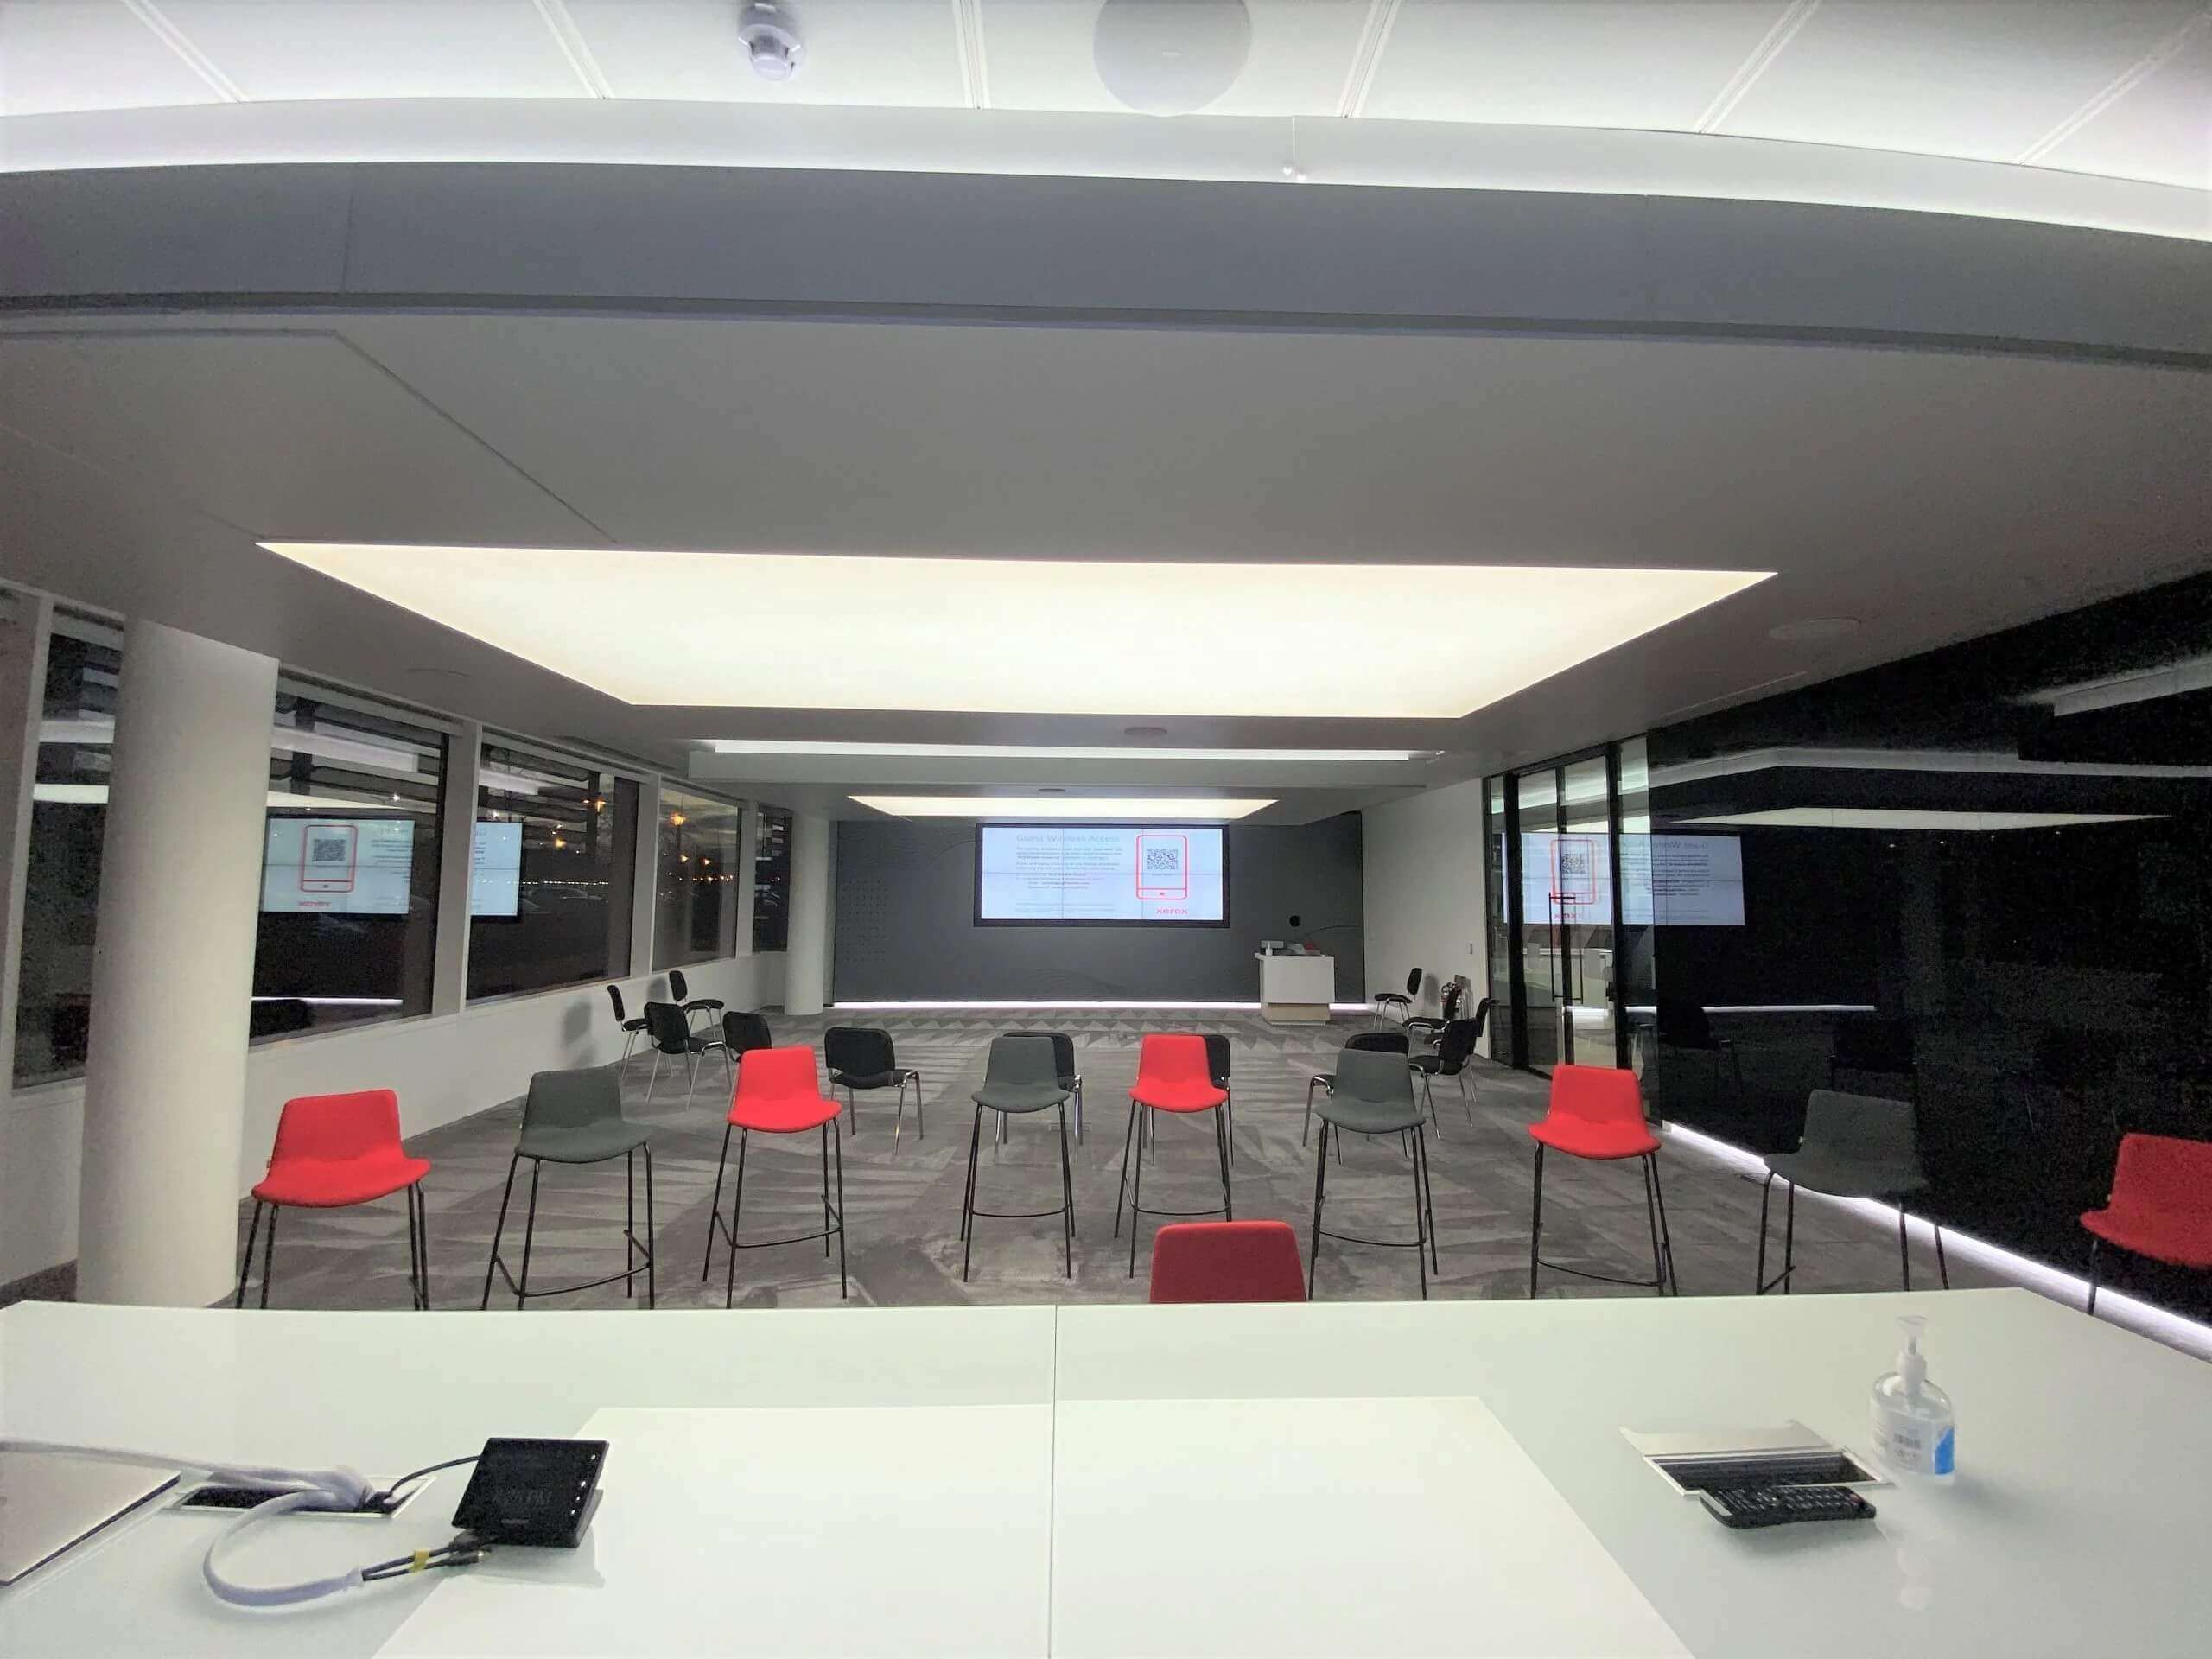 Meeting room at Xerox with recessed lighting